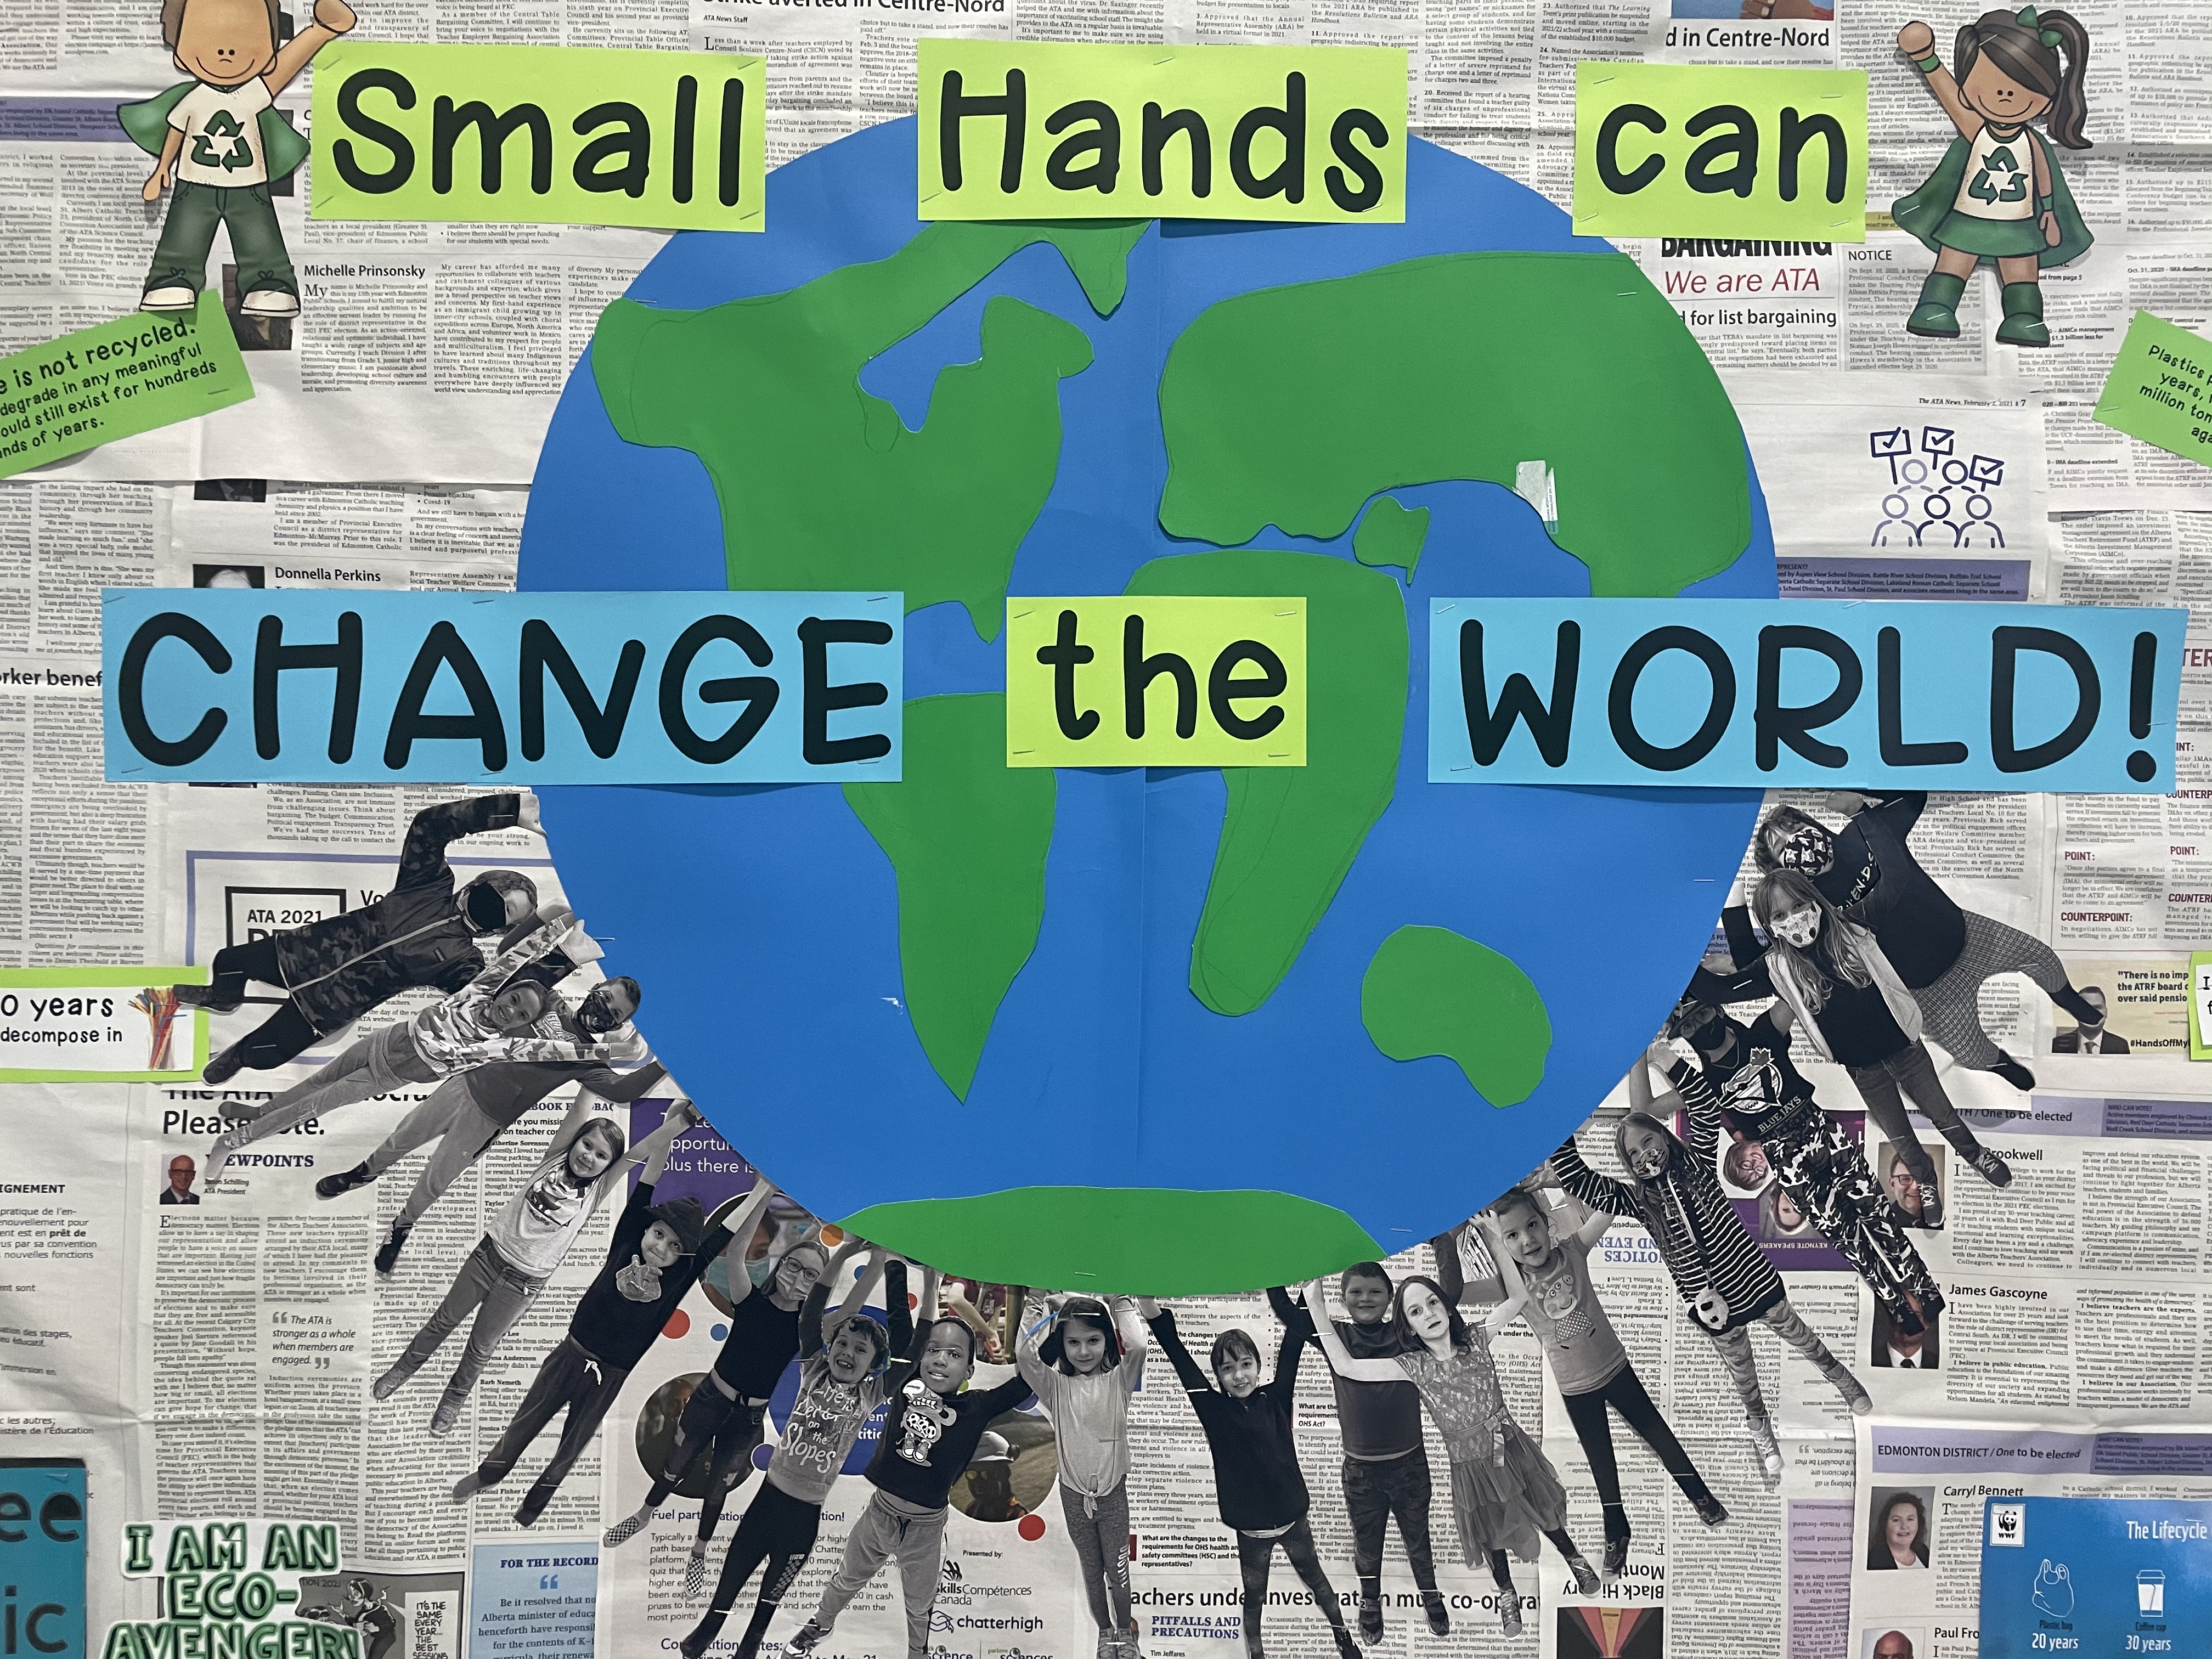 Small Hands can Change the World